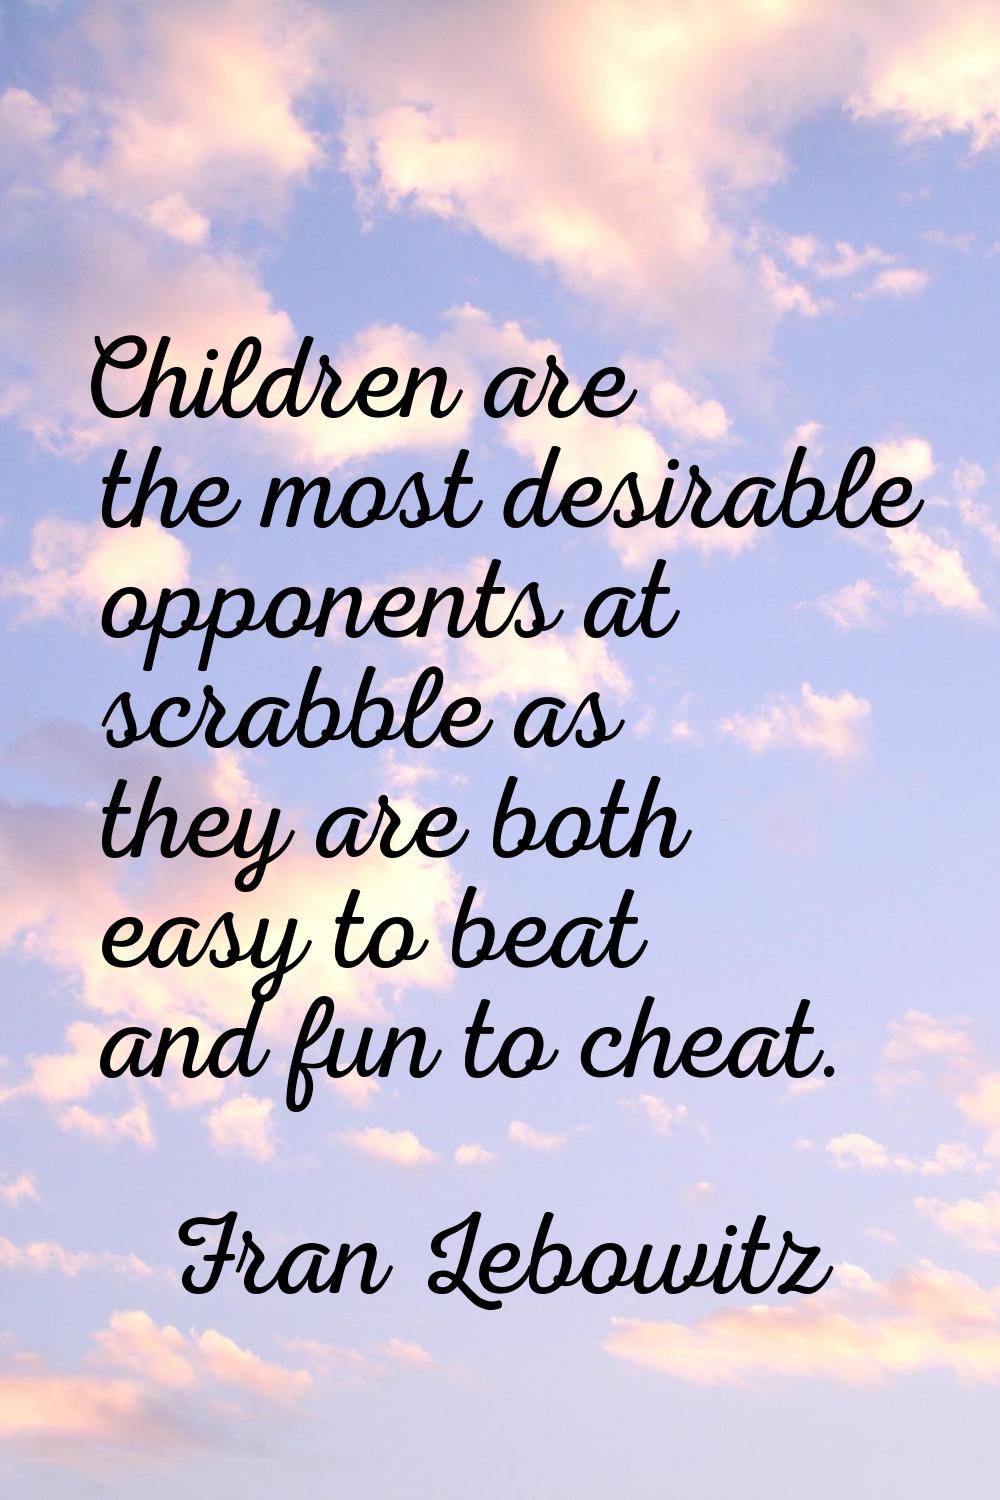 Children are the most desirable opponents at scrabble as they are both easy to beat and fun to chea